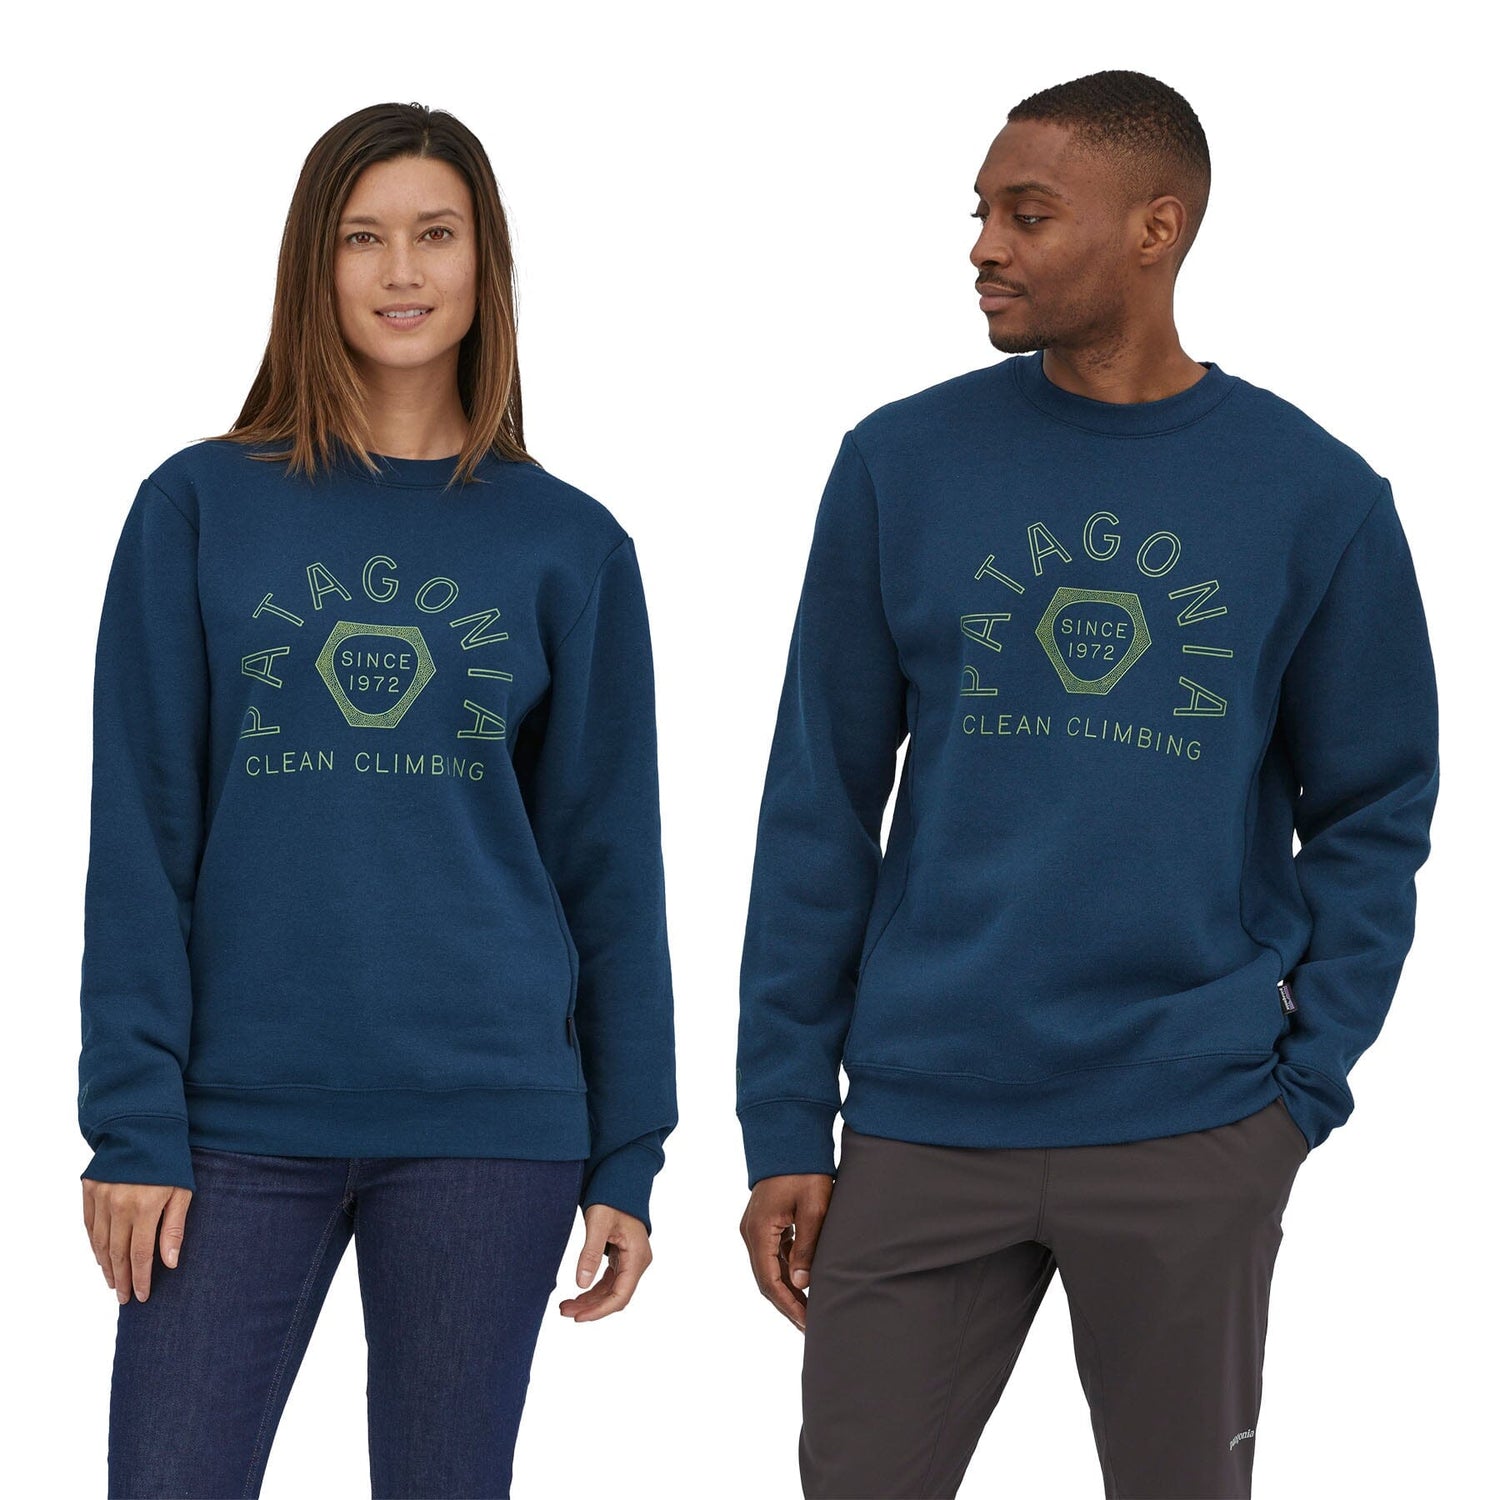 Patagonia - Unisex Clean Climb Hex Uprisal Crew Sweatshirt - Recycled PET & Recycled Cotton - Weekendbee - sustainable sportswear